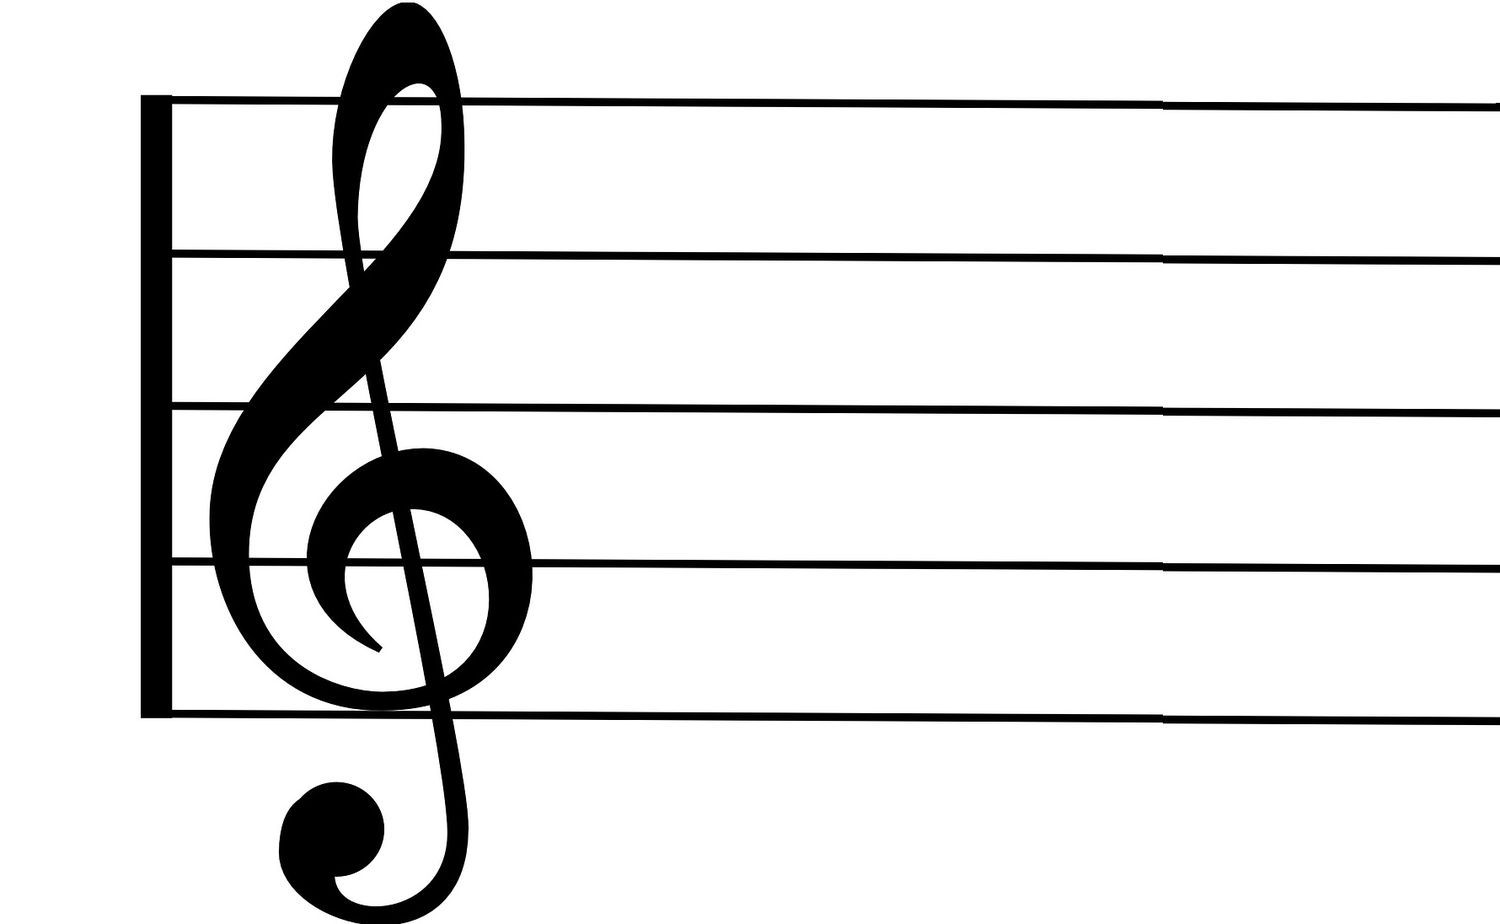 Why Is The Treble Clef Also Called The G Clef?